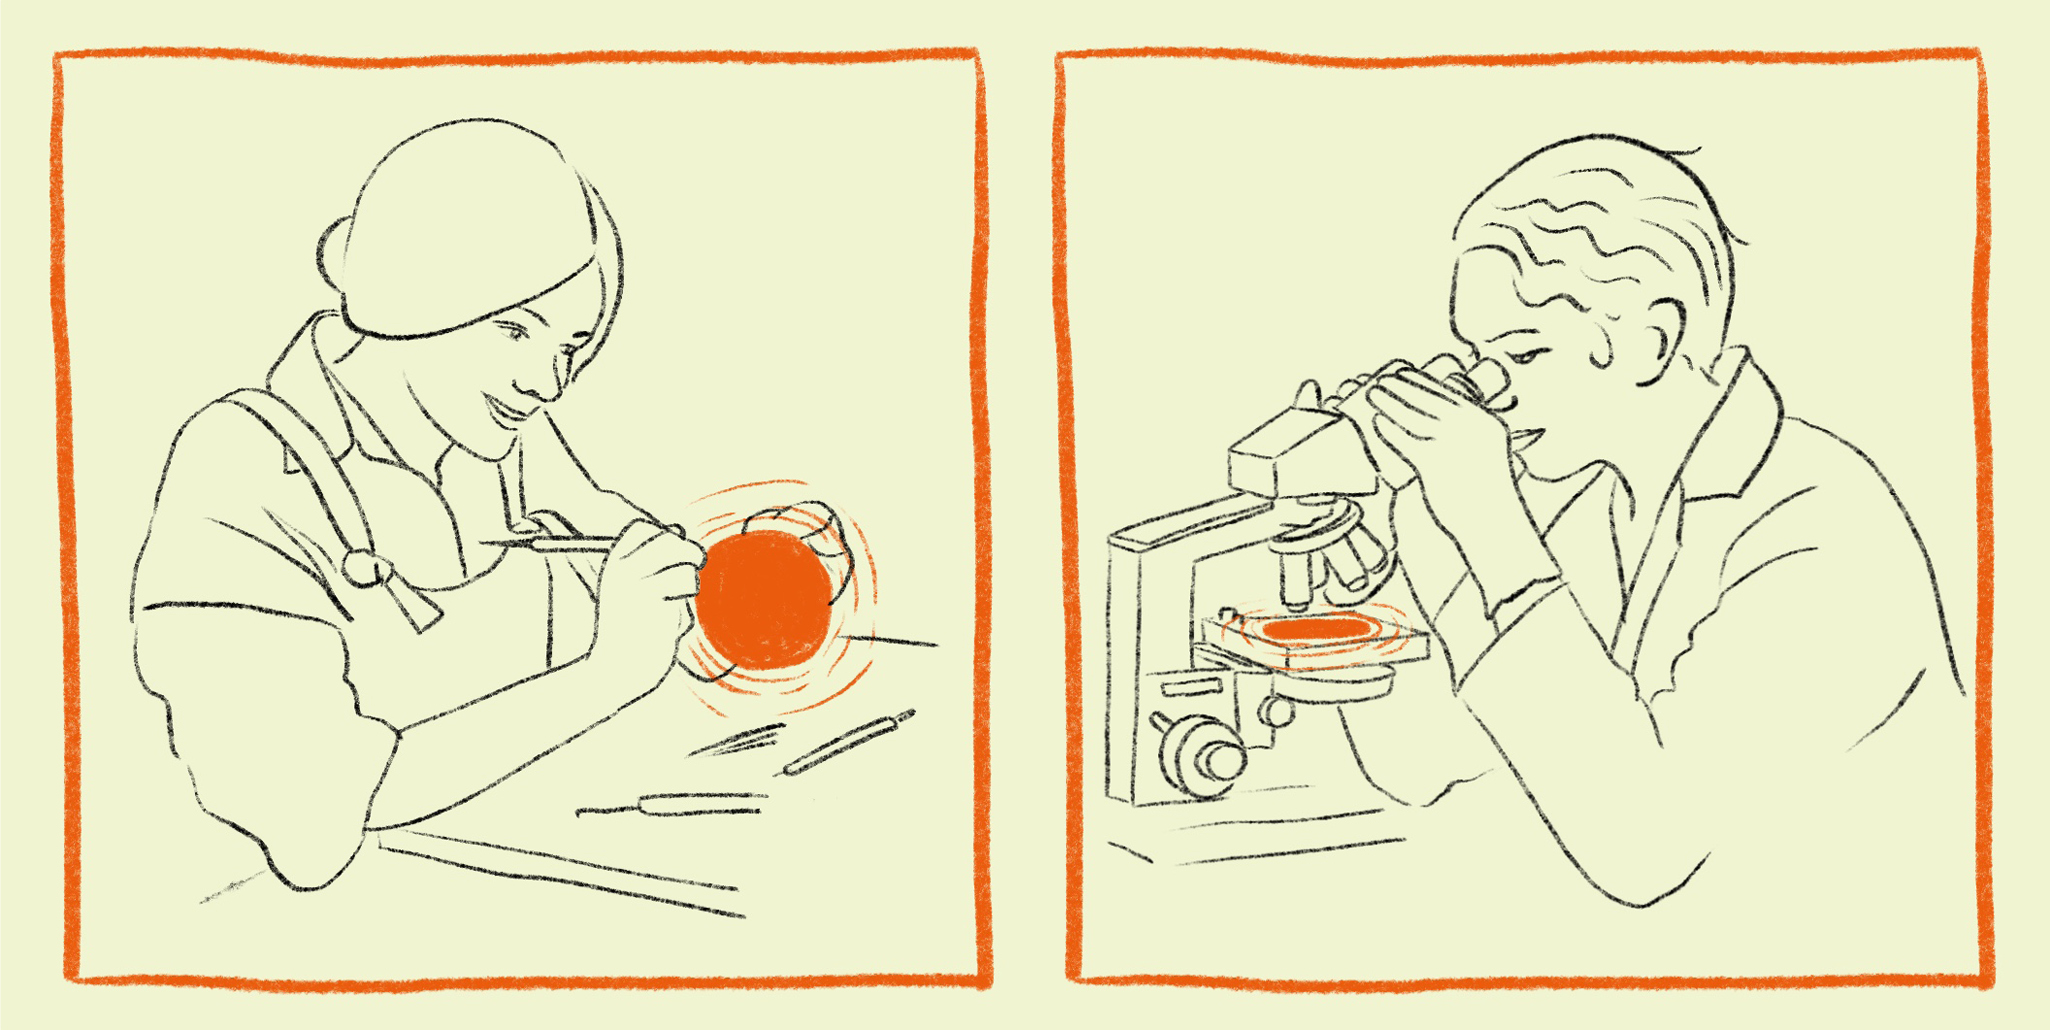 Two pencil drawings, one of a craftsperson sat at a bench holding a tool and crafting an orange orb, one of a scientist looking through a microscope at an orange orb